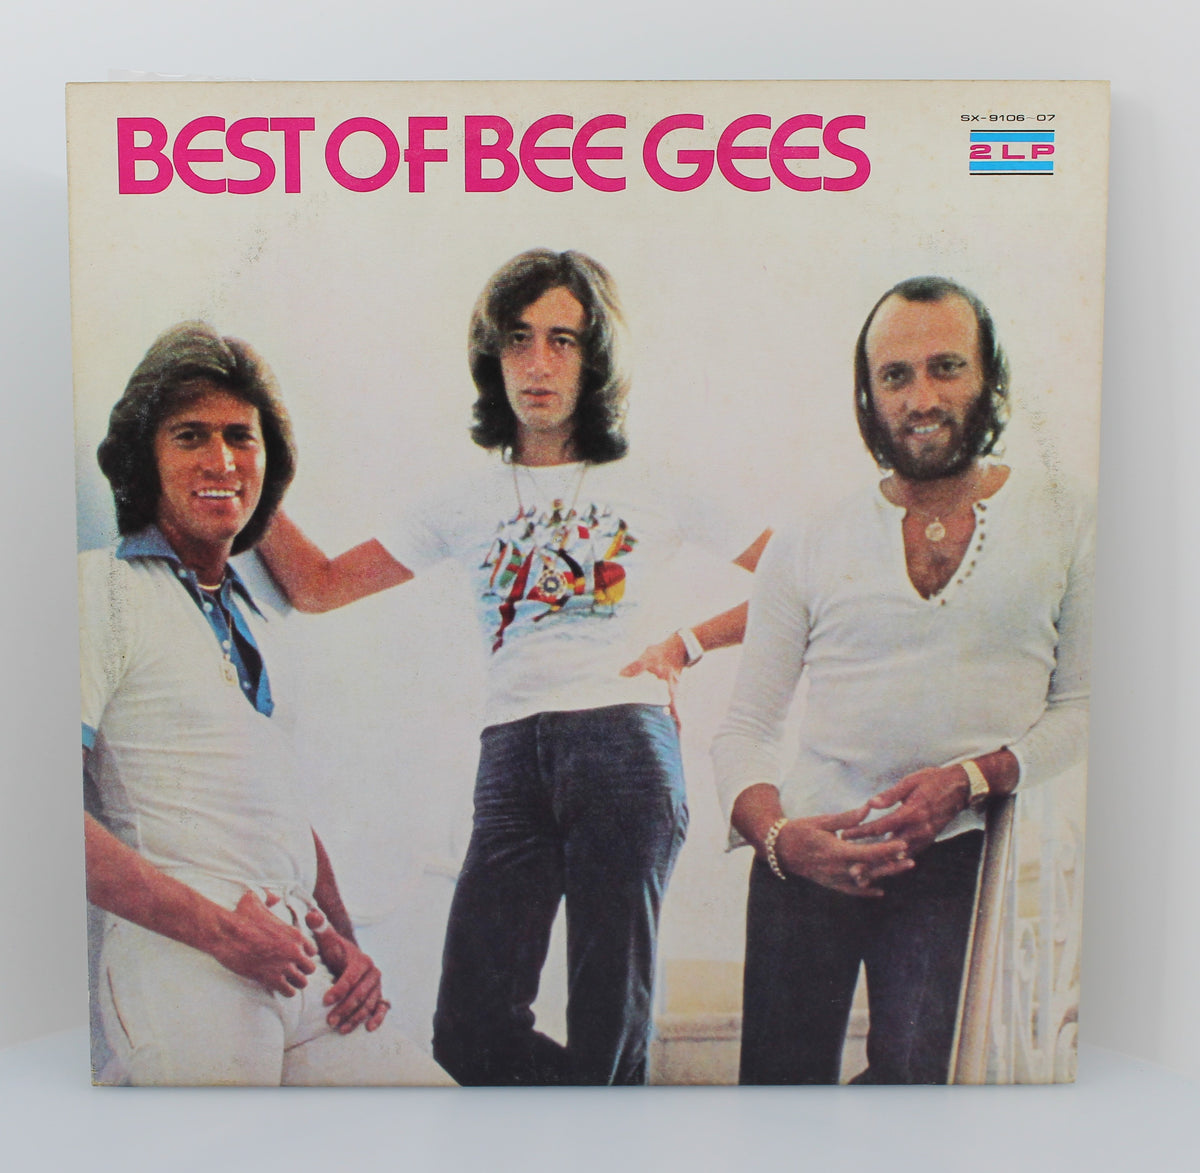 Bee Gees – Best Of, 2 x Vinyl, LP, Compilation, Unofficial Release, Taiwan 1978